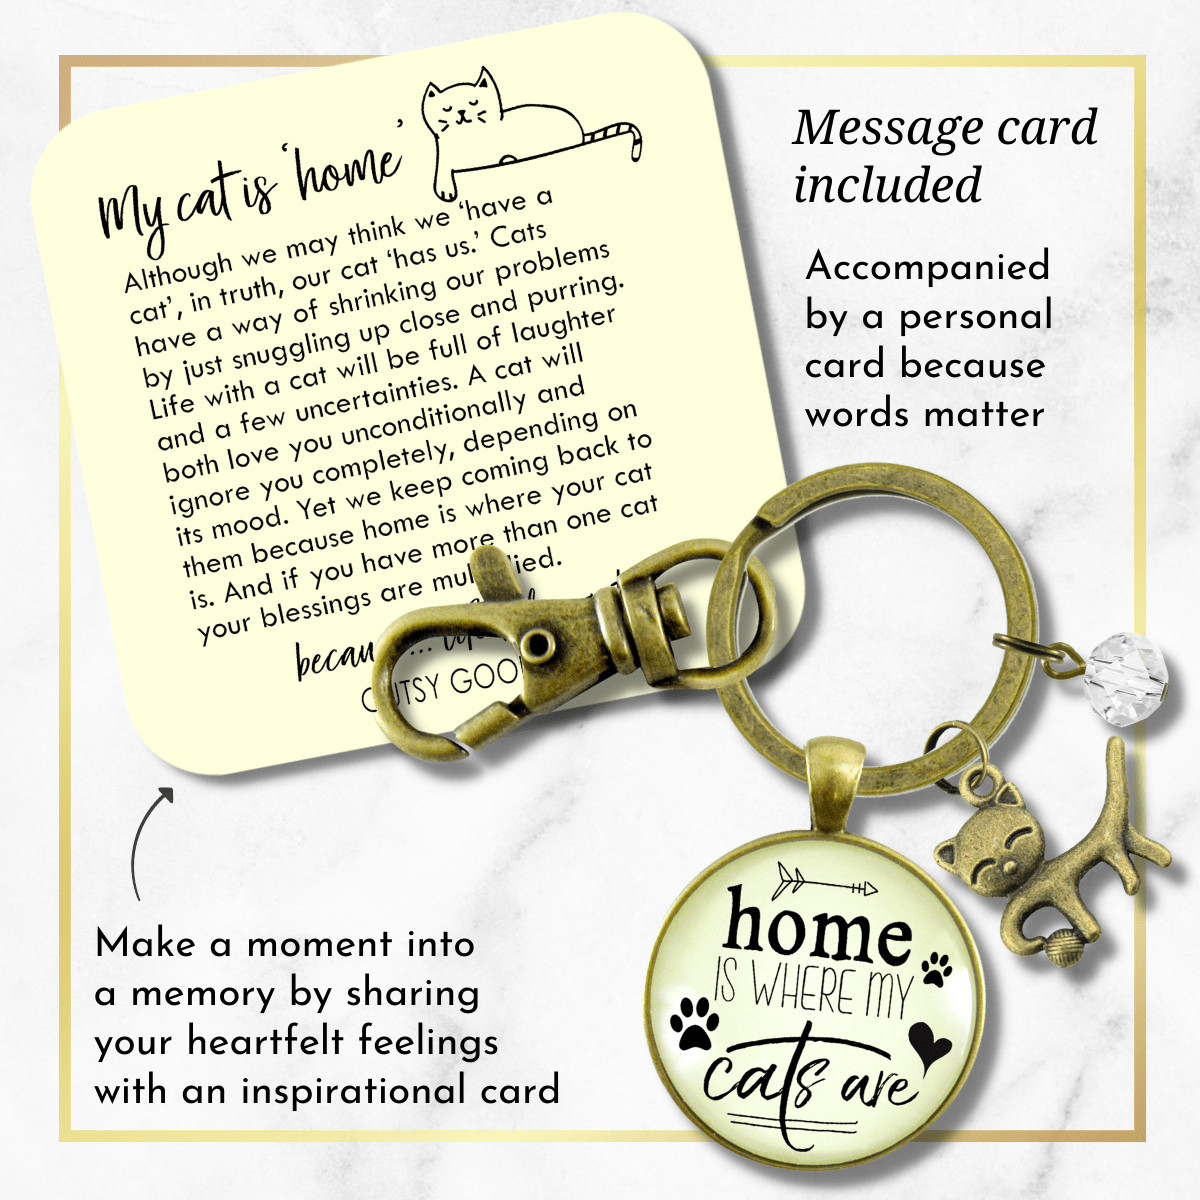 Cats Keychain Home Is Where My Cats Are Gift Quote Kitty Lover Related Feline Jewelry For Women - Gutsy Goodness Handmade Jewelry;Cats Keychain Home Is Where My Cats Are Gift Quote Kitty Lover Related Feline Jewelry For Women - Gutsy Goodness Handmade Jewelry Gifts